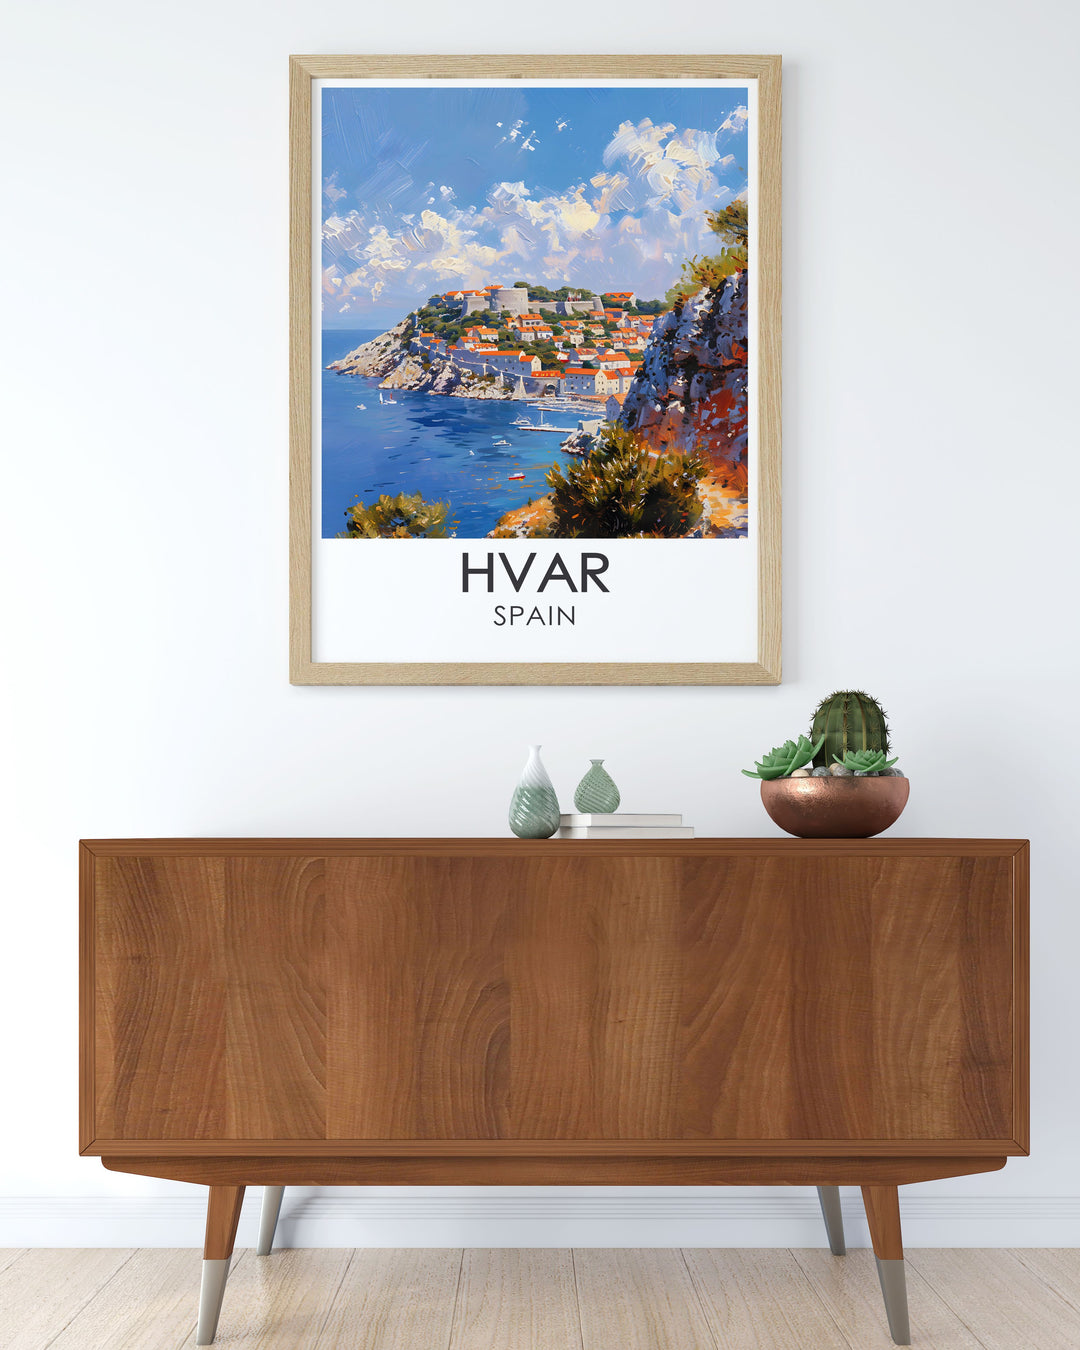 Vintage poster of Hvar, capturing the timeless beauty and charm of this Adriatic gem. This print is ideal for those who appreciate classic coastal views and want to bring a piece of Mediterranean elegance into their decor.